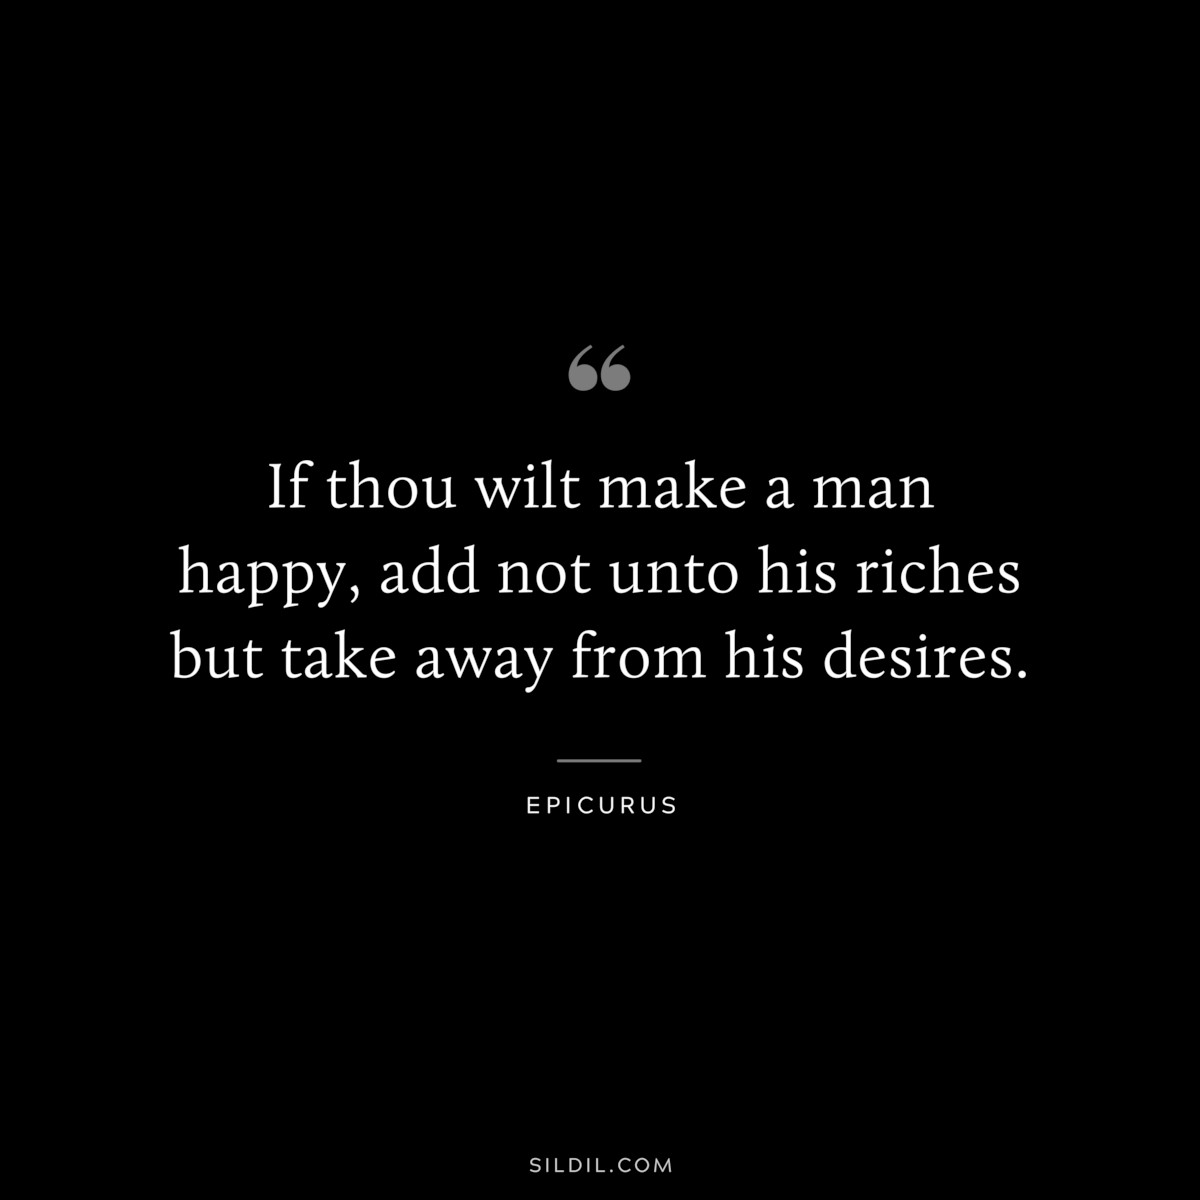 If thou wilt make a man happy, add not unto his riches but take away from his desires. — Epicurus